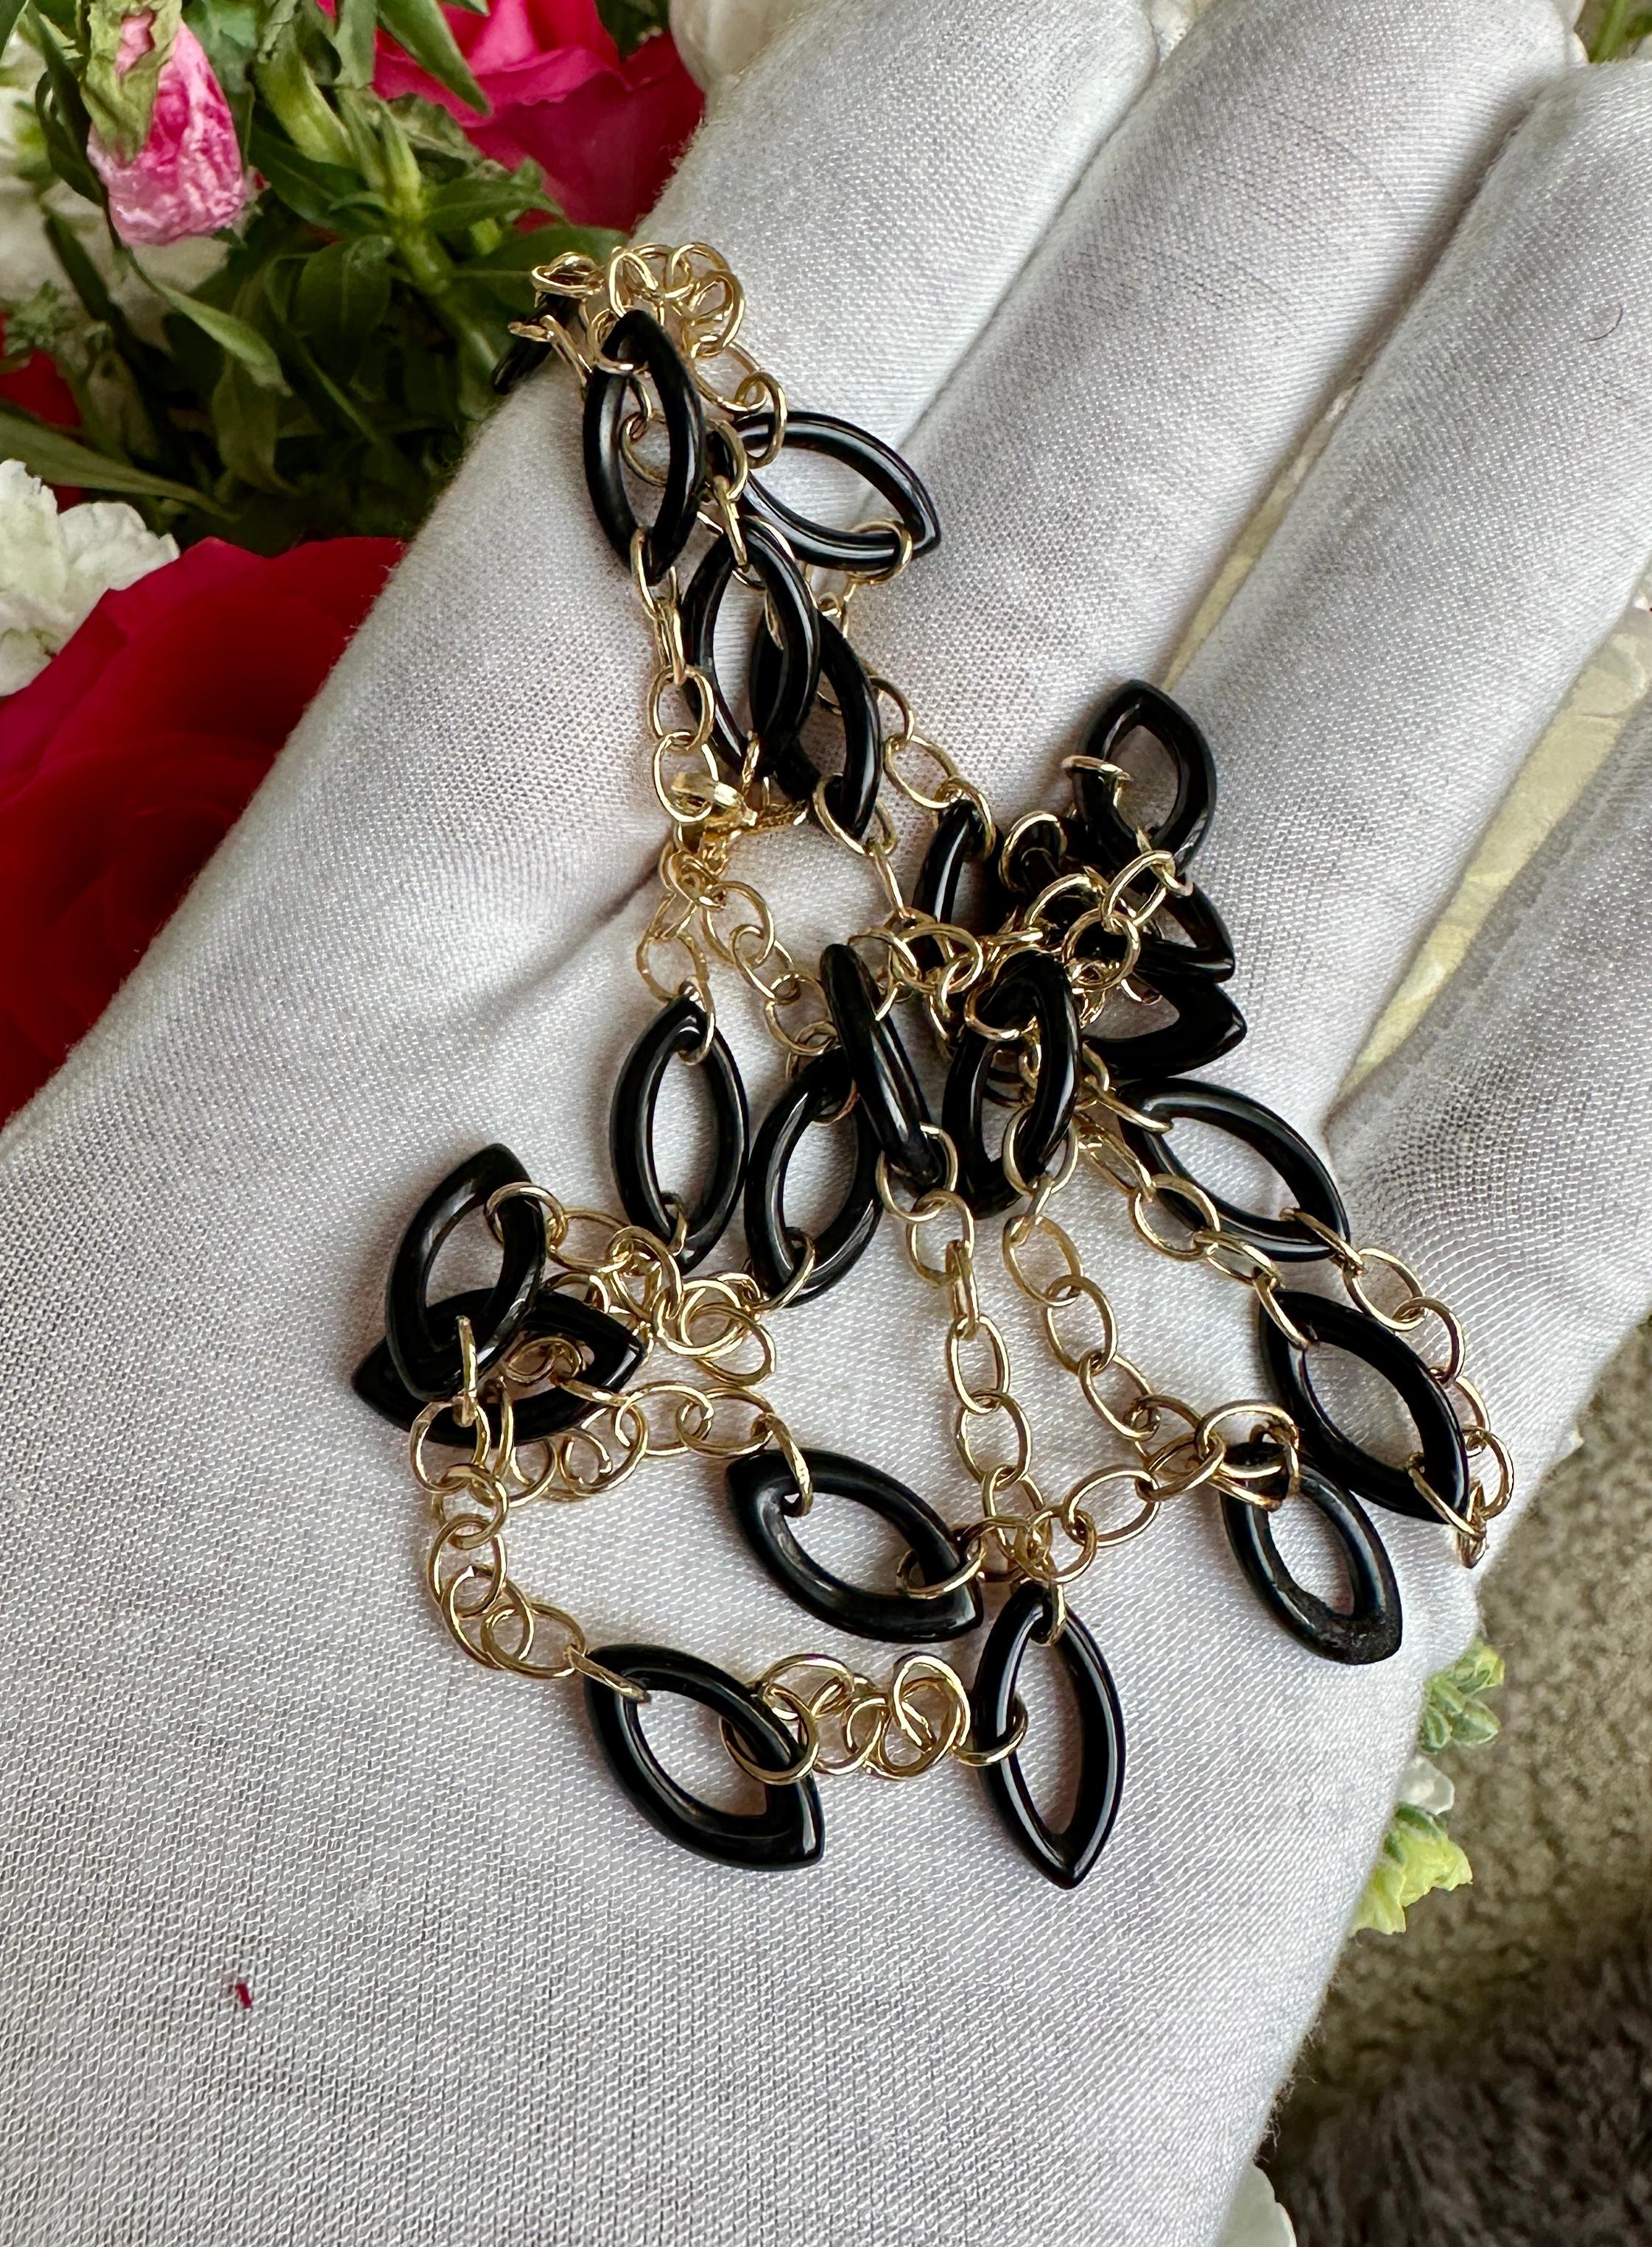 Black Coral 14 Karat Gold Necklace 36 Inches Chain Link Necklace In Excellent Condition For Sale In New York, NY